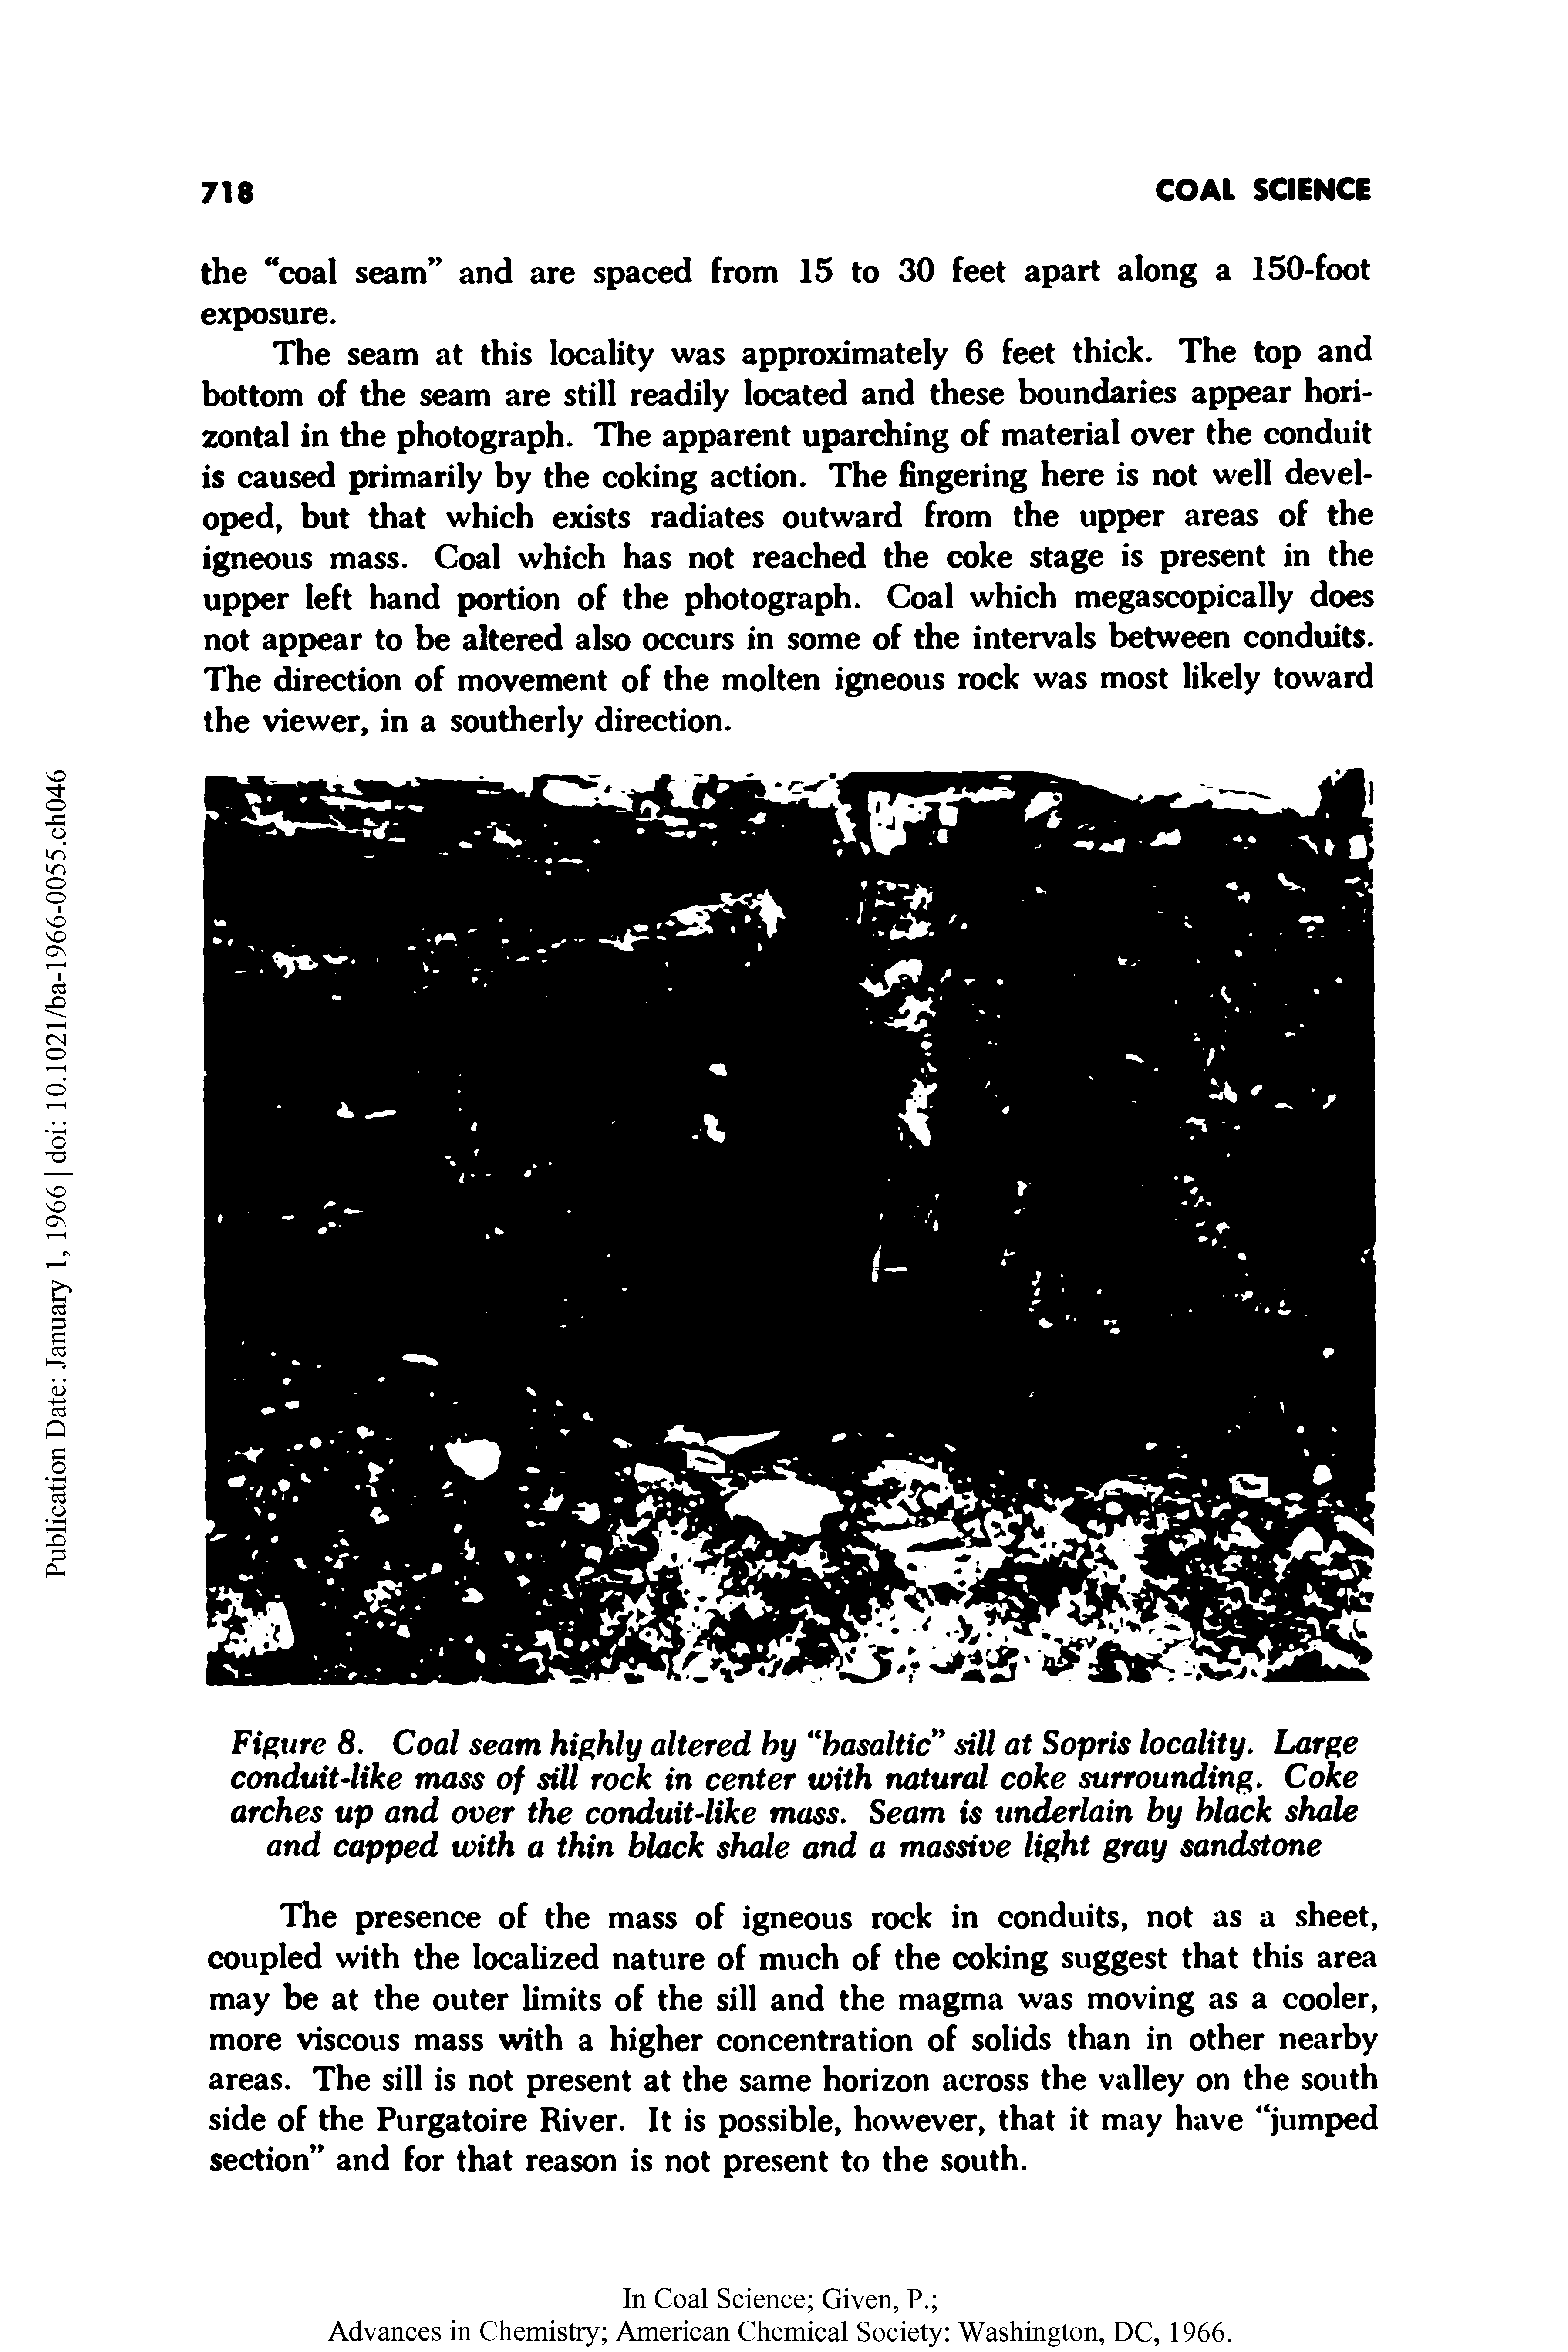 Figure 8. Coal seam highly altered hy basaltic sill at Sopris locality. Large conduit-like mass of sill rock in center with natural coke surrounding. Coke arches up and over the conduit-like mass. Seam is underlain by black shale and capped with a thin black shale and a massive light gray sandstone...